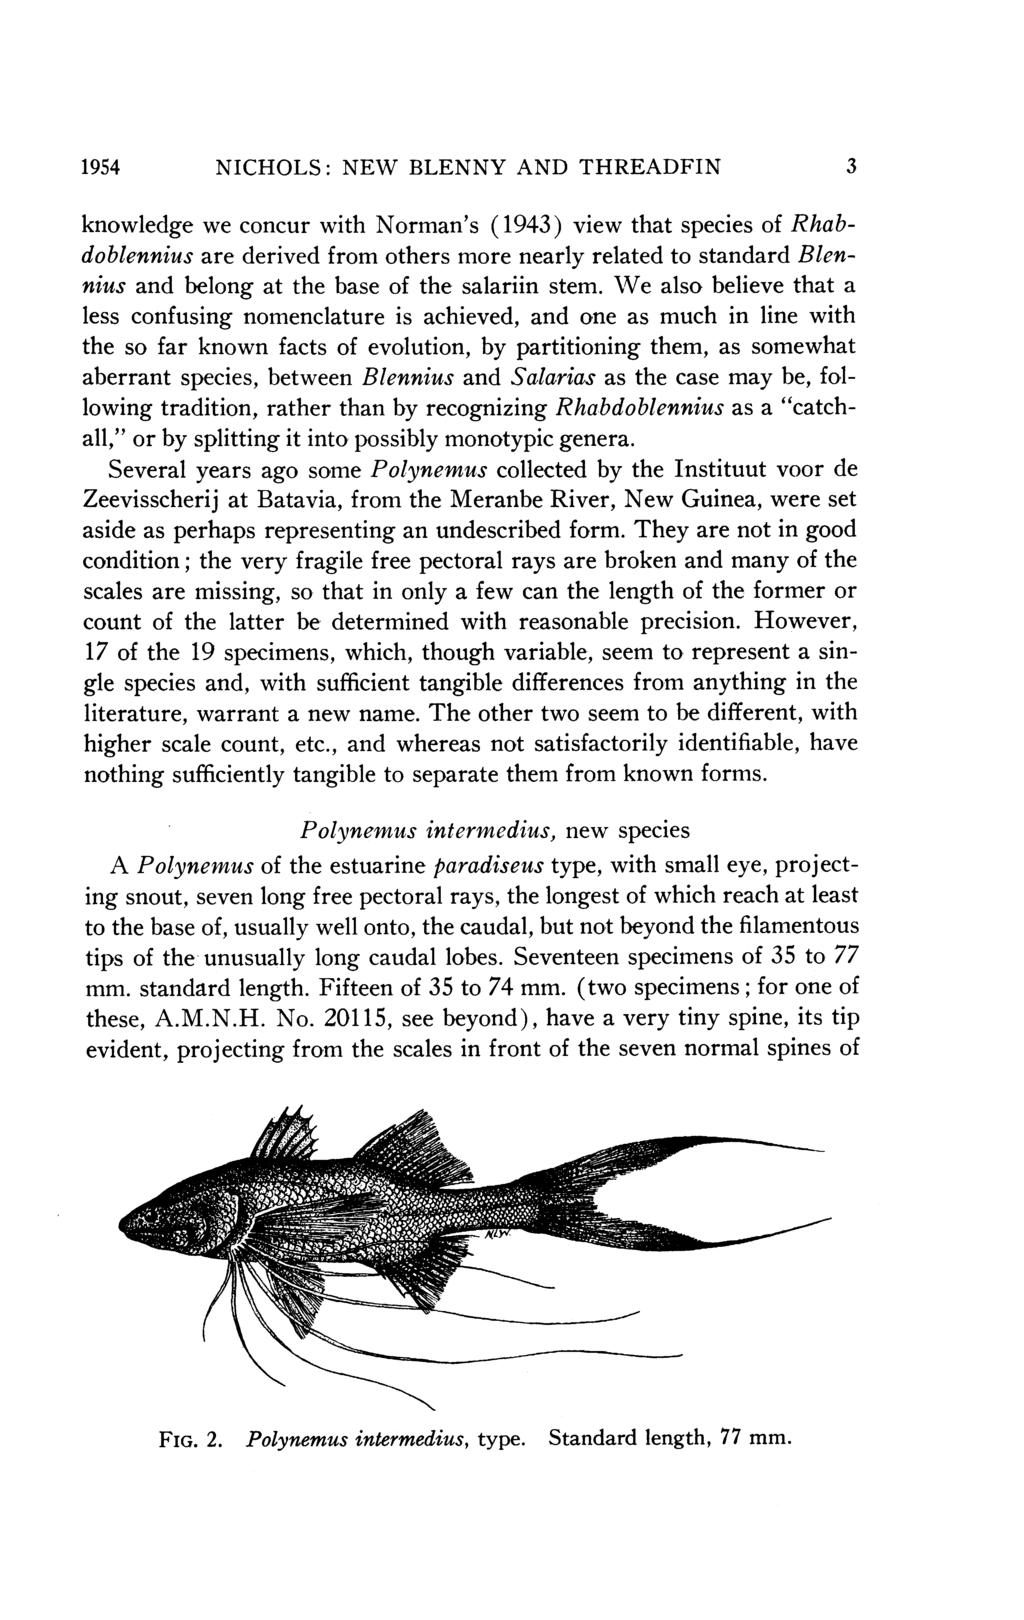 1954 NICHOLS: NEW BLENNY AND THREADFIN 3 knowledge we concur with Norman's (1943) view that species of Rhabdoblennius are derived from others more nearly related to standard Blennius and belong at